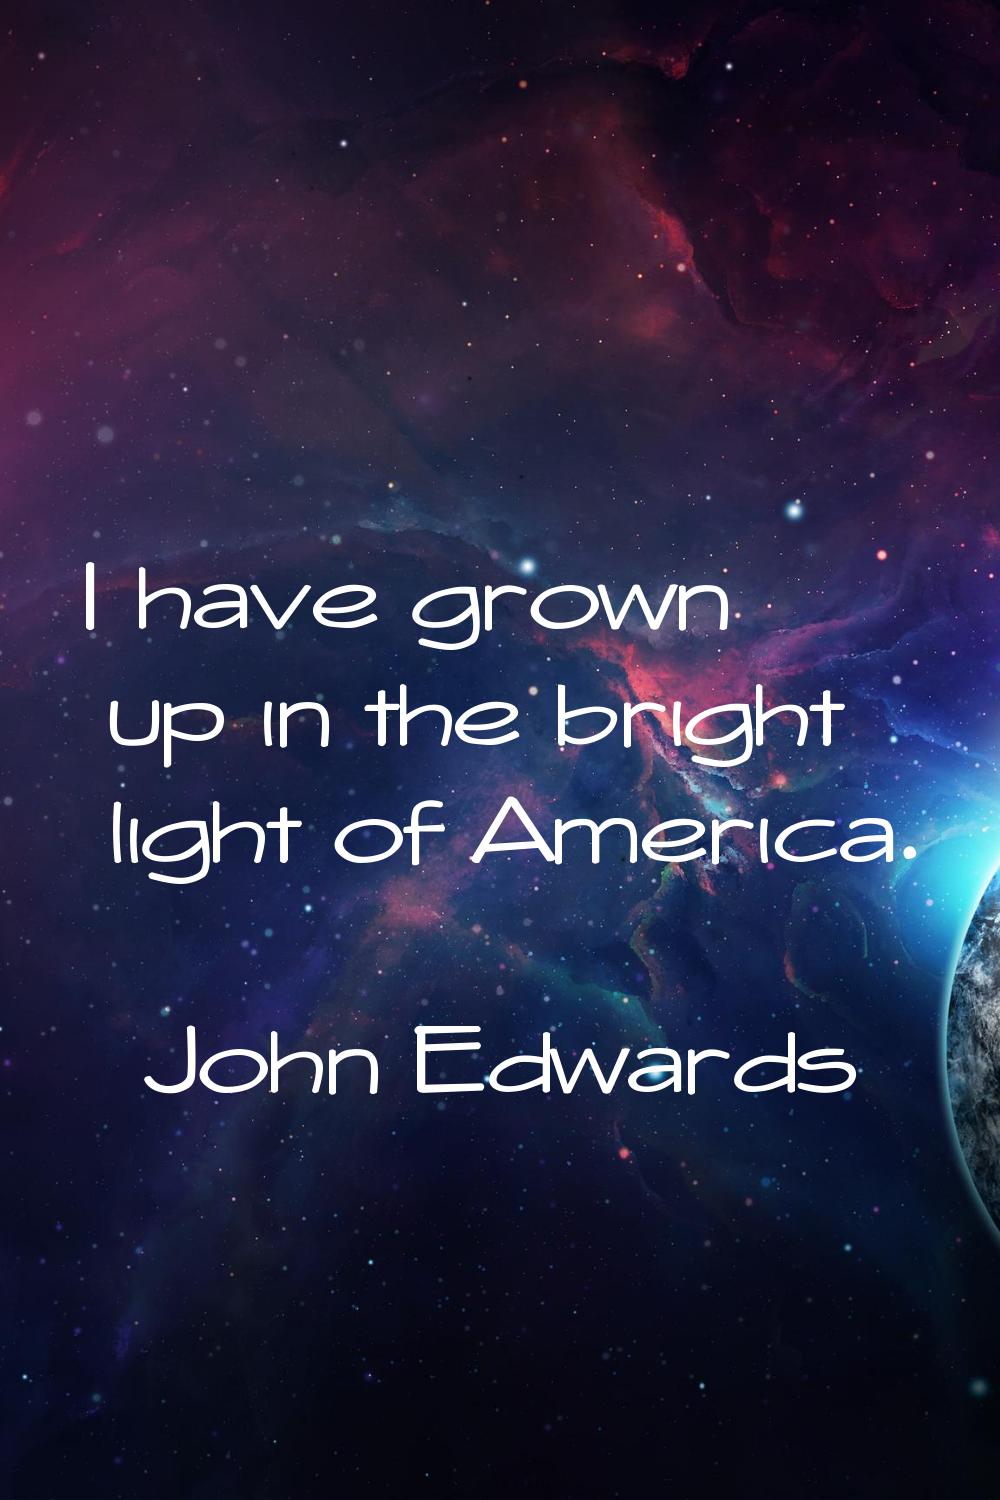 I have grown up in the bright light of America.